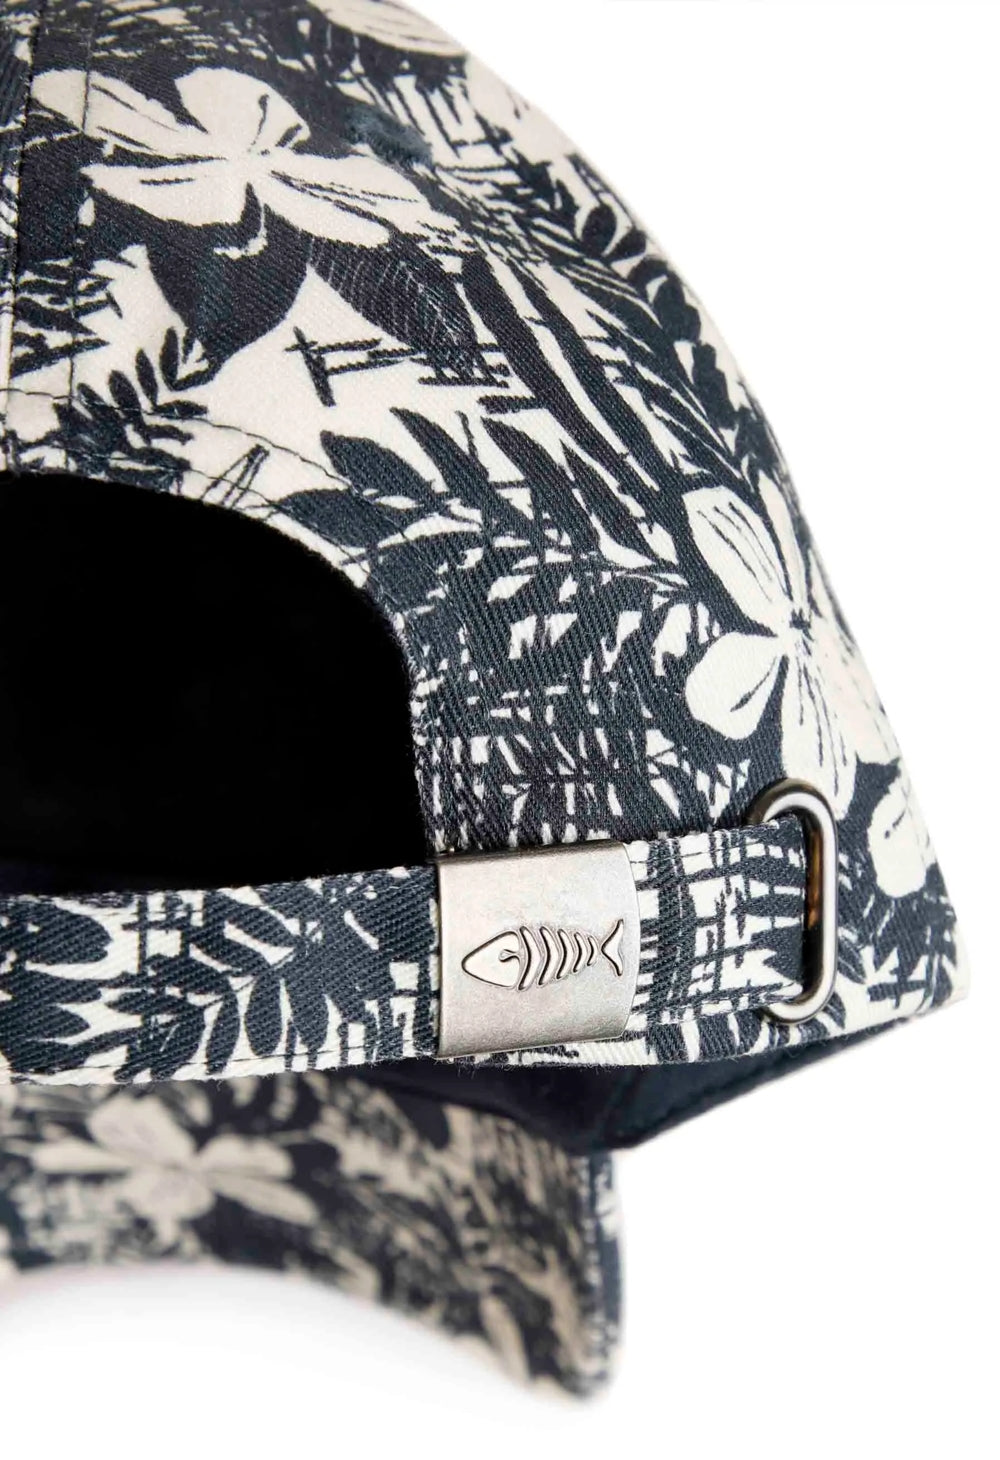 Adults Rigg cap from Weird Fish in Dark Denim Blue and White floral print with metal buckle back.